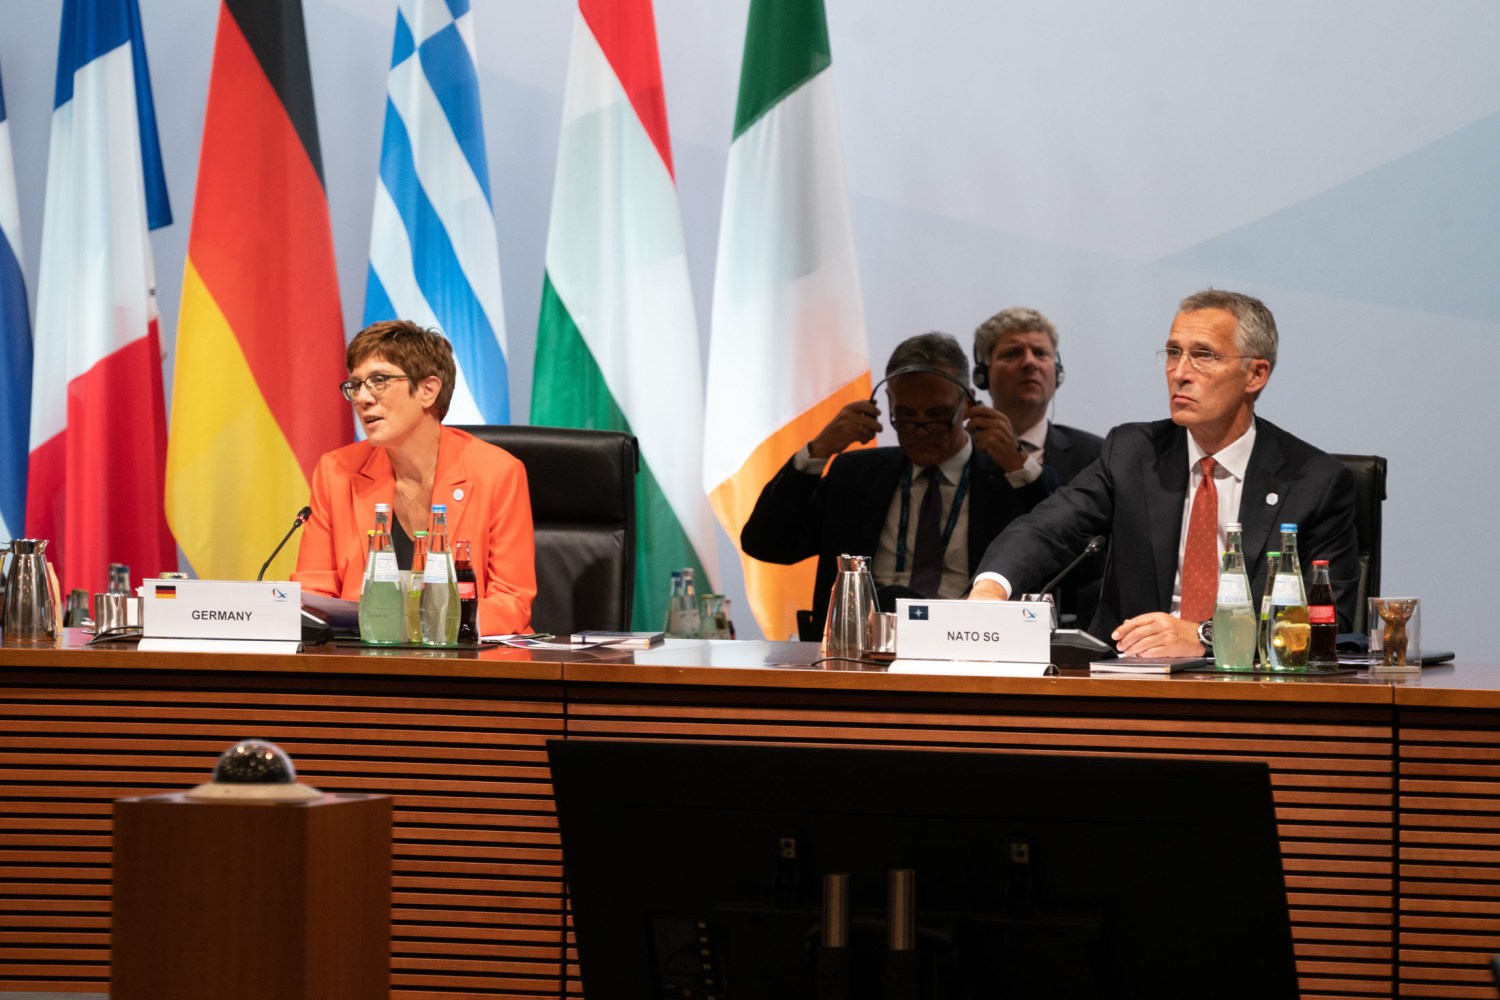 Berlin, Germany.- German Defense Minister Annegret Kramp-Karrenbauer (left) and NATO Secretary General Jens Stoltenberg (right) attend a meeting of European Union defense ministers in Berlin, Germany on August 26, 2020. The meeting discusses missions and operations and the situation in Belarus and the eastern Mediterranean.